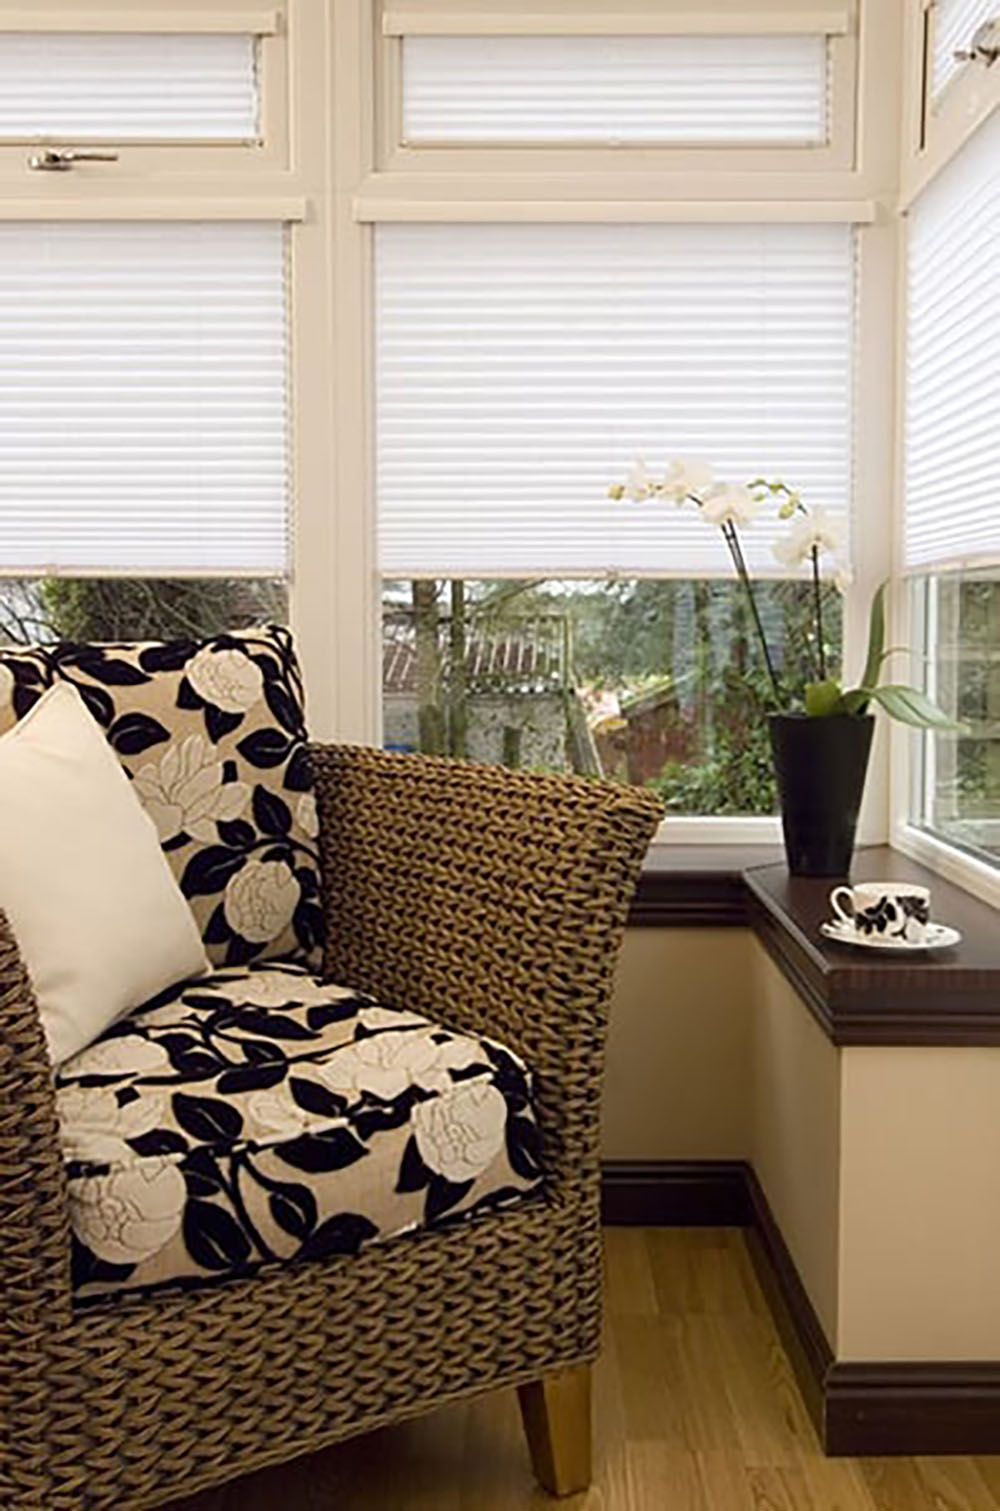 Bright room corner with blinds